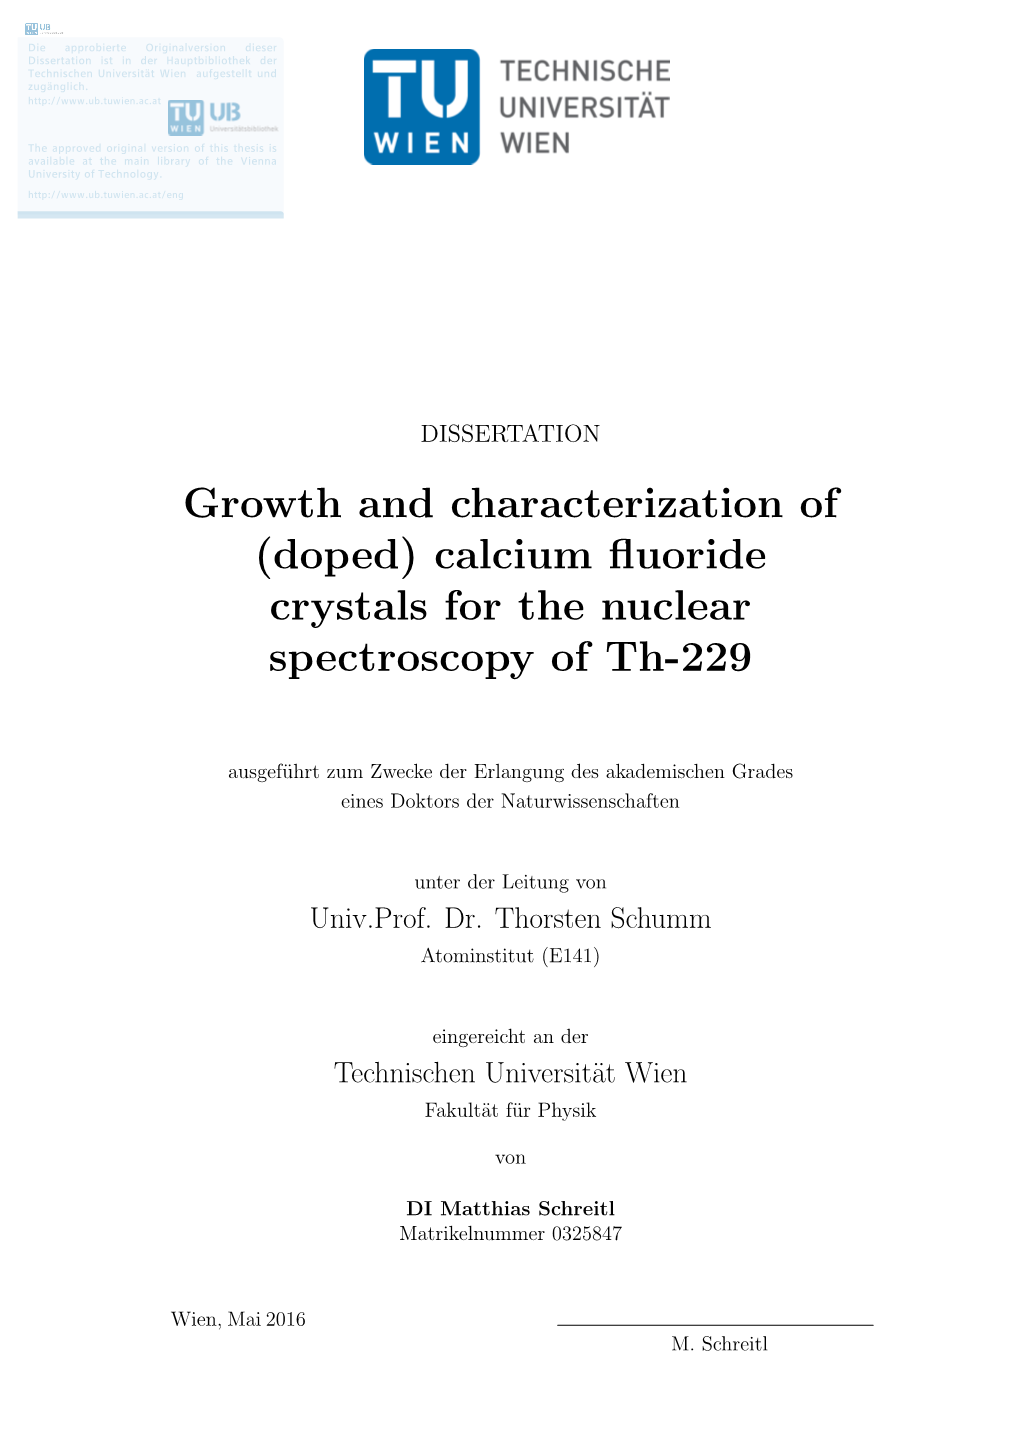 (Doped) Calcium Fluoride Crystals for the Nuclear Spectroscopy of Th-229